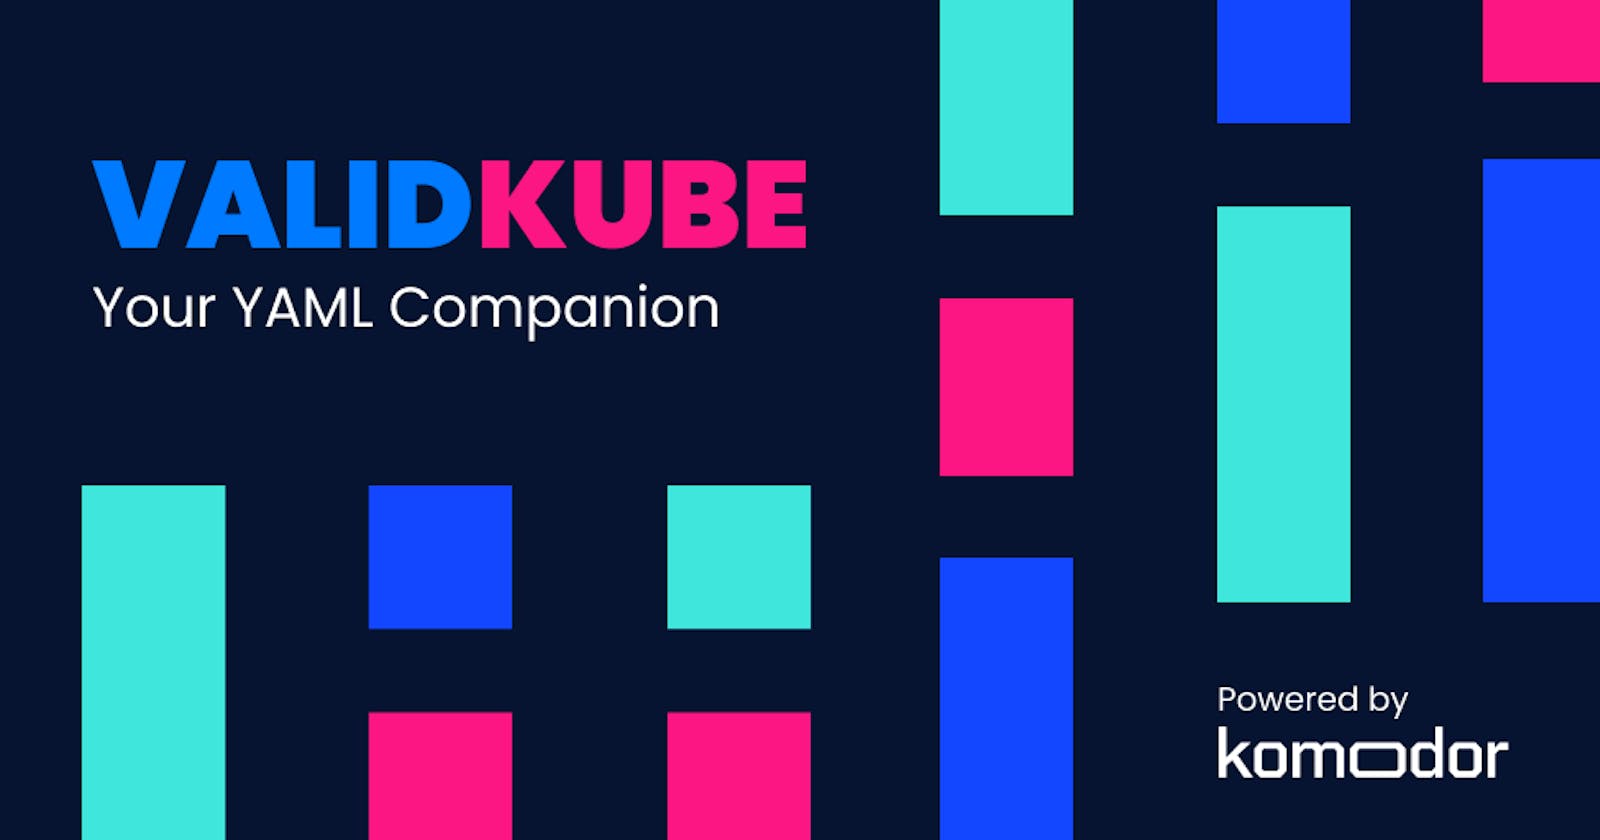 Validate, Clean & Secure Your Kubernetes YAML With Validkube